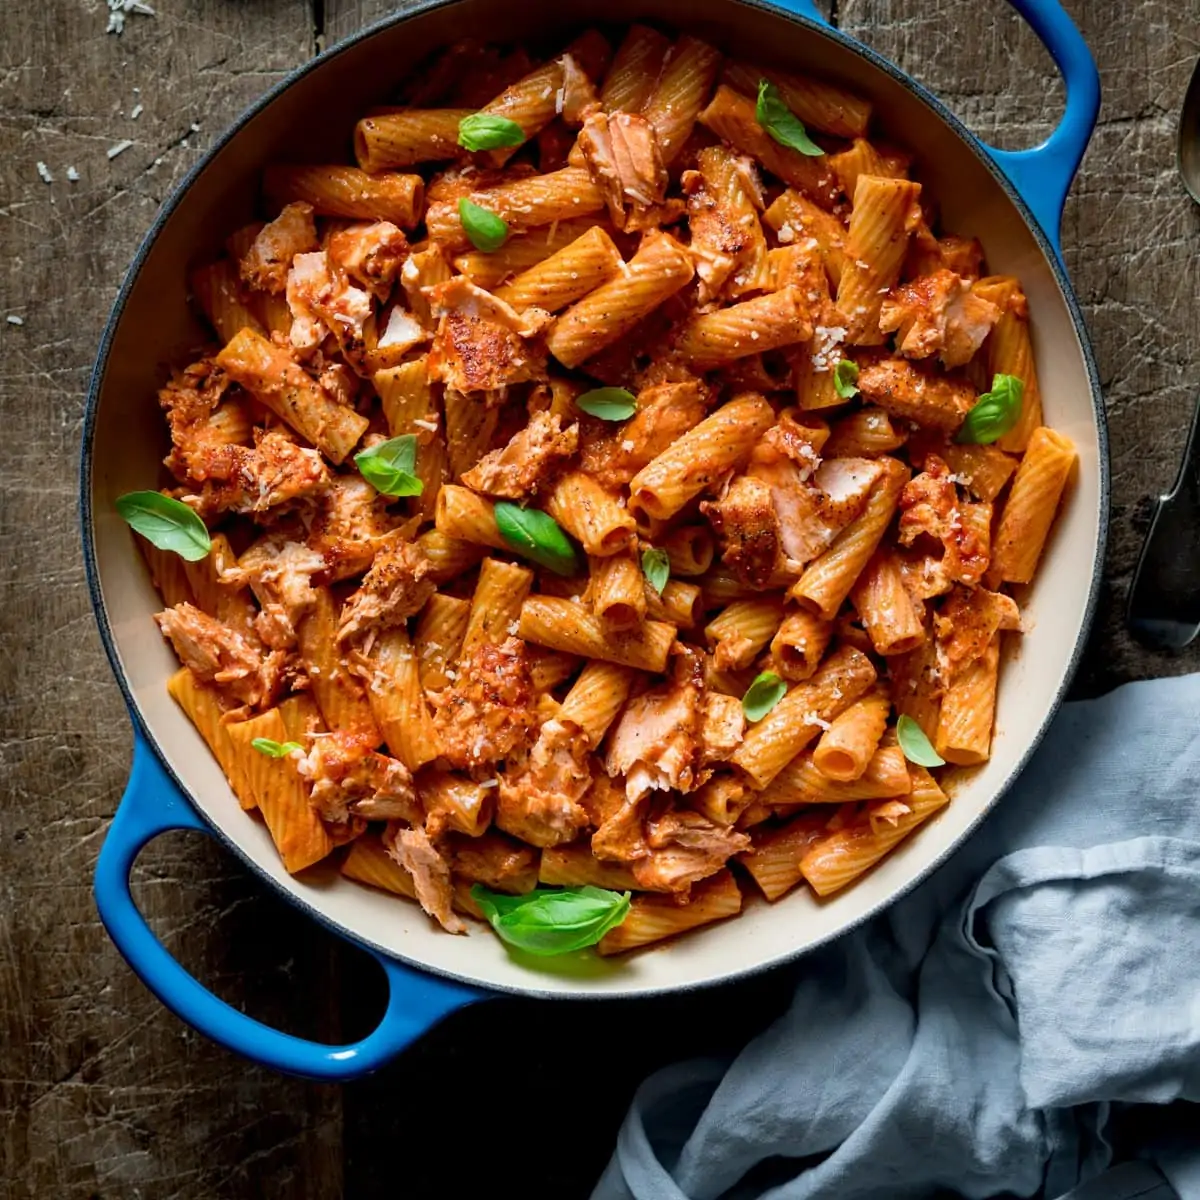 Square image of rigatoni and salmon in creamy tomato sauce in a blue cast iron pan on a wooden table.